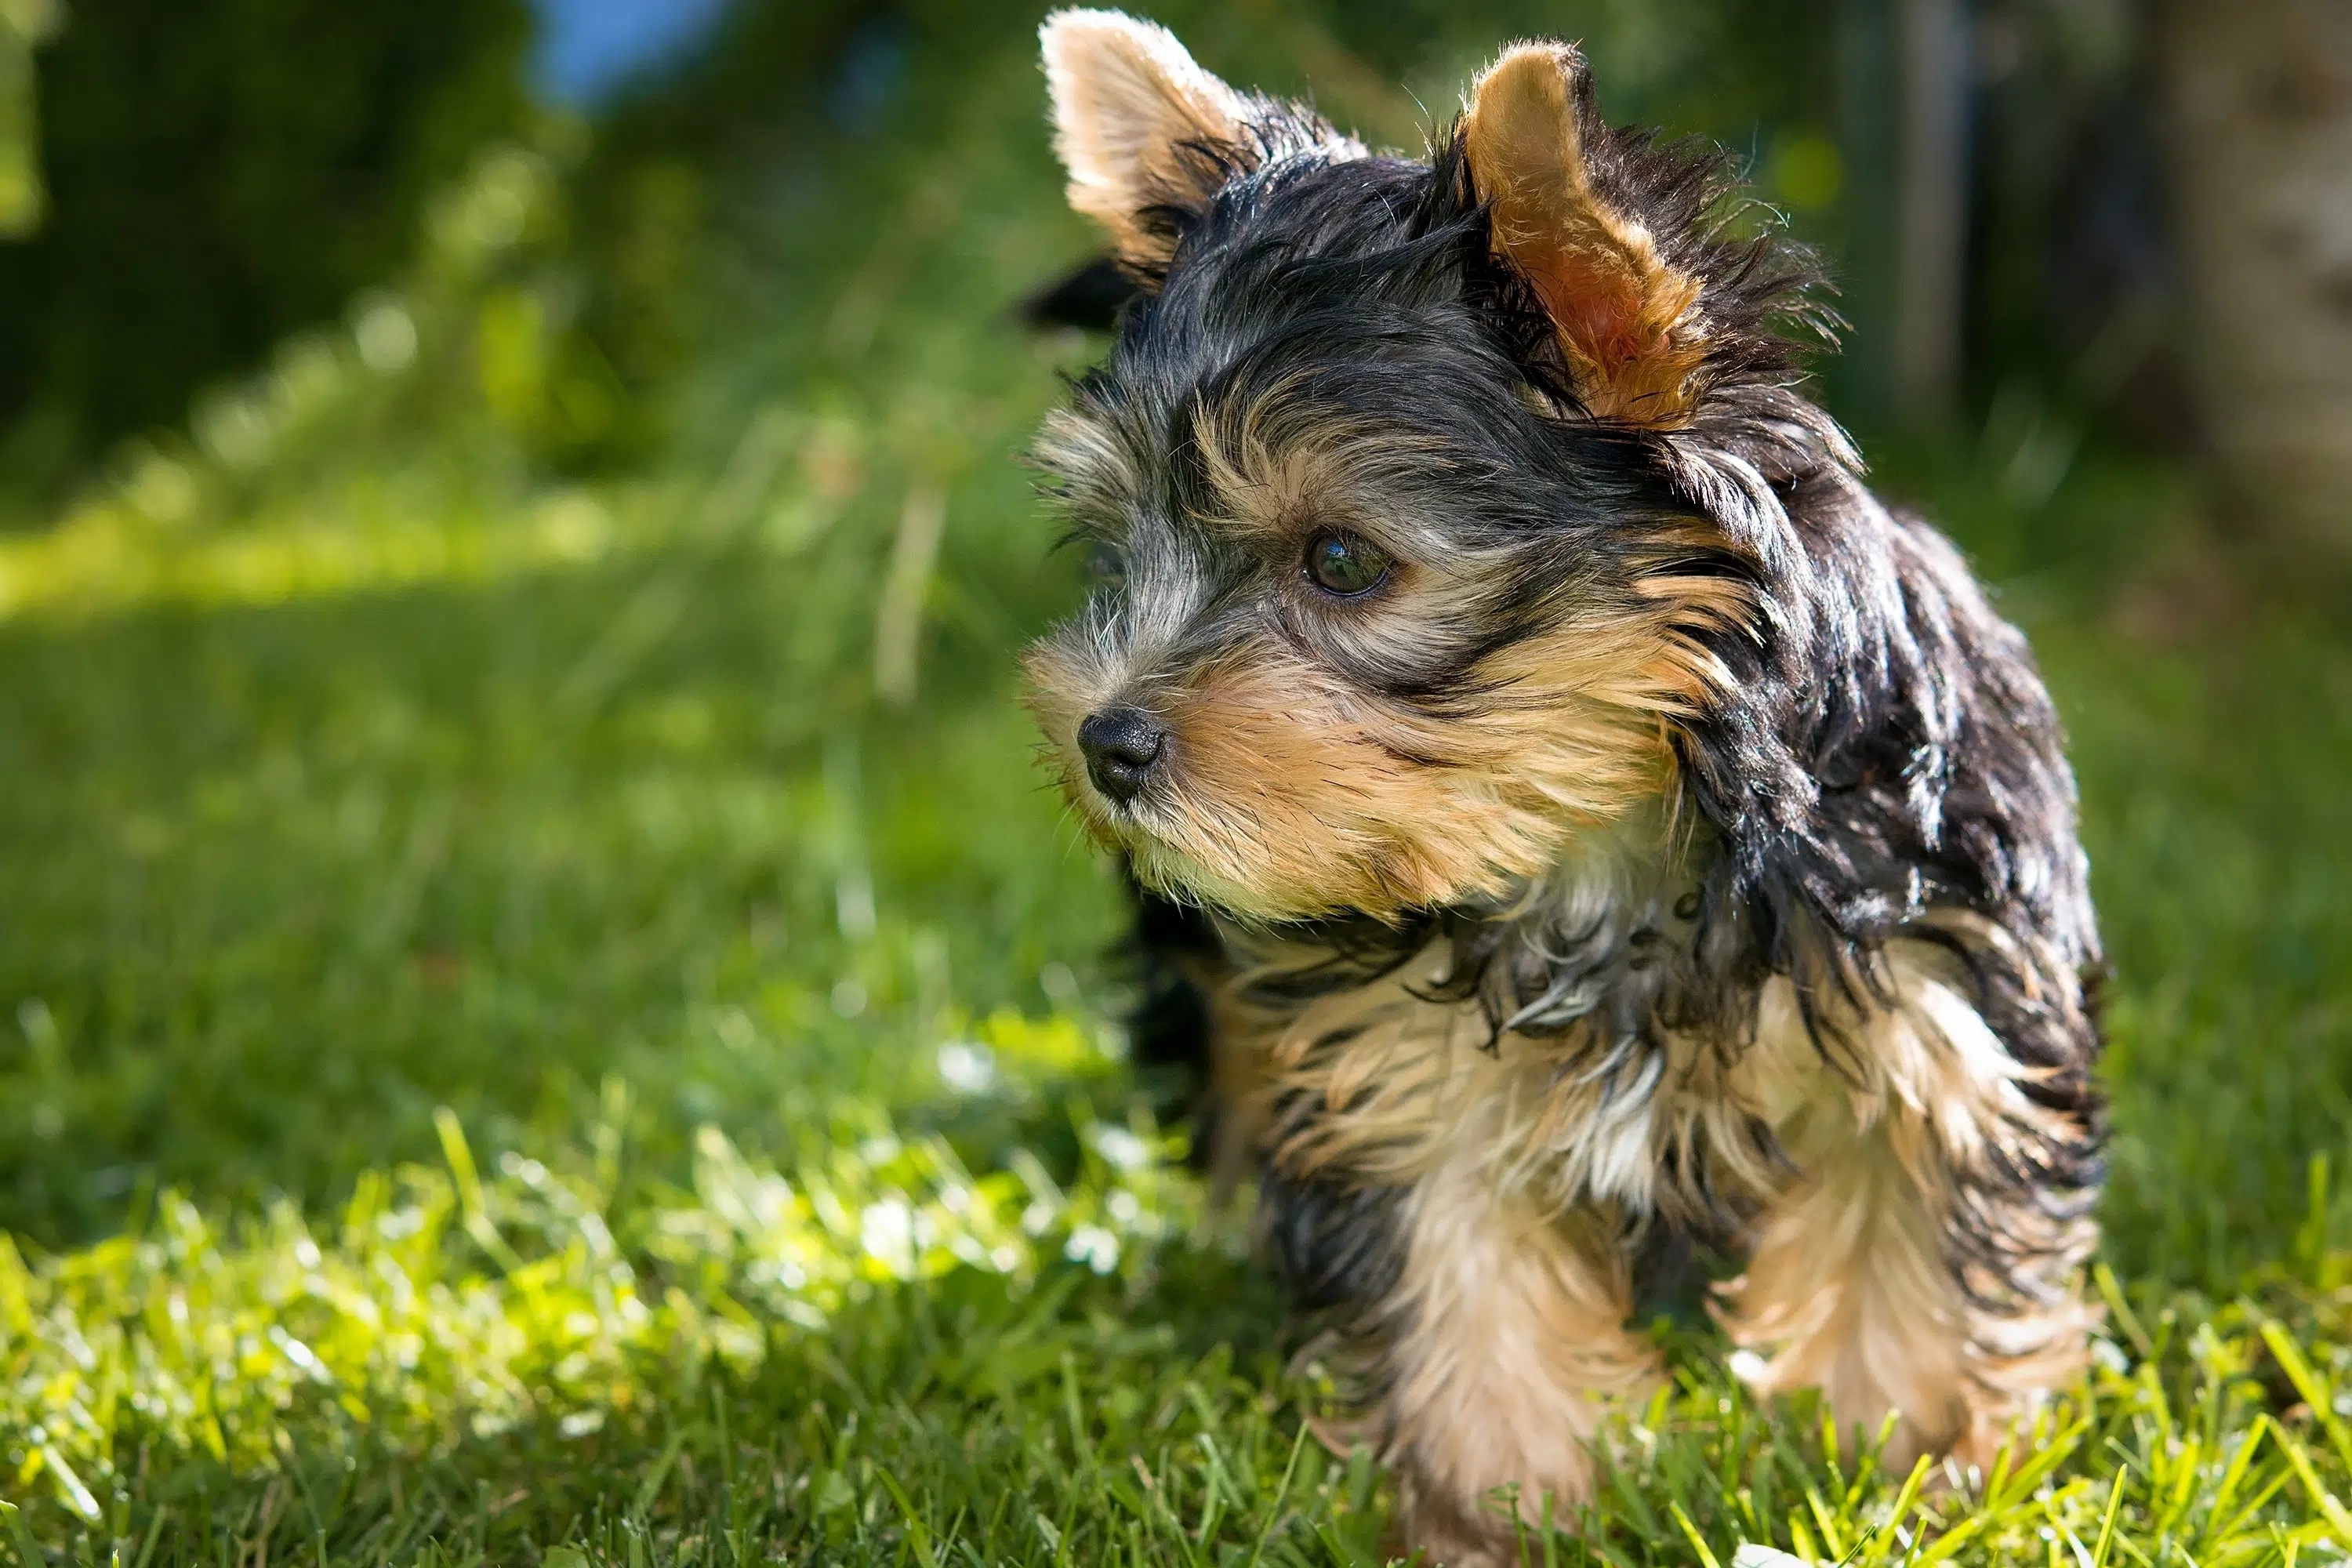 Shaking in Terriers can be caused by several things, such as cold or anxiety. Make your pup is healthy like this brown and black pooch in the grass.